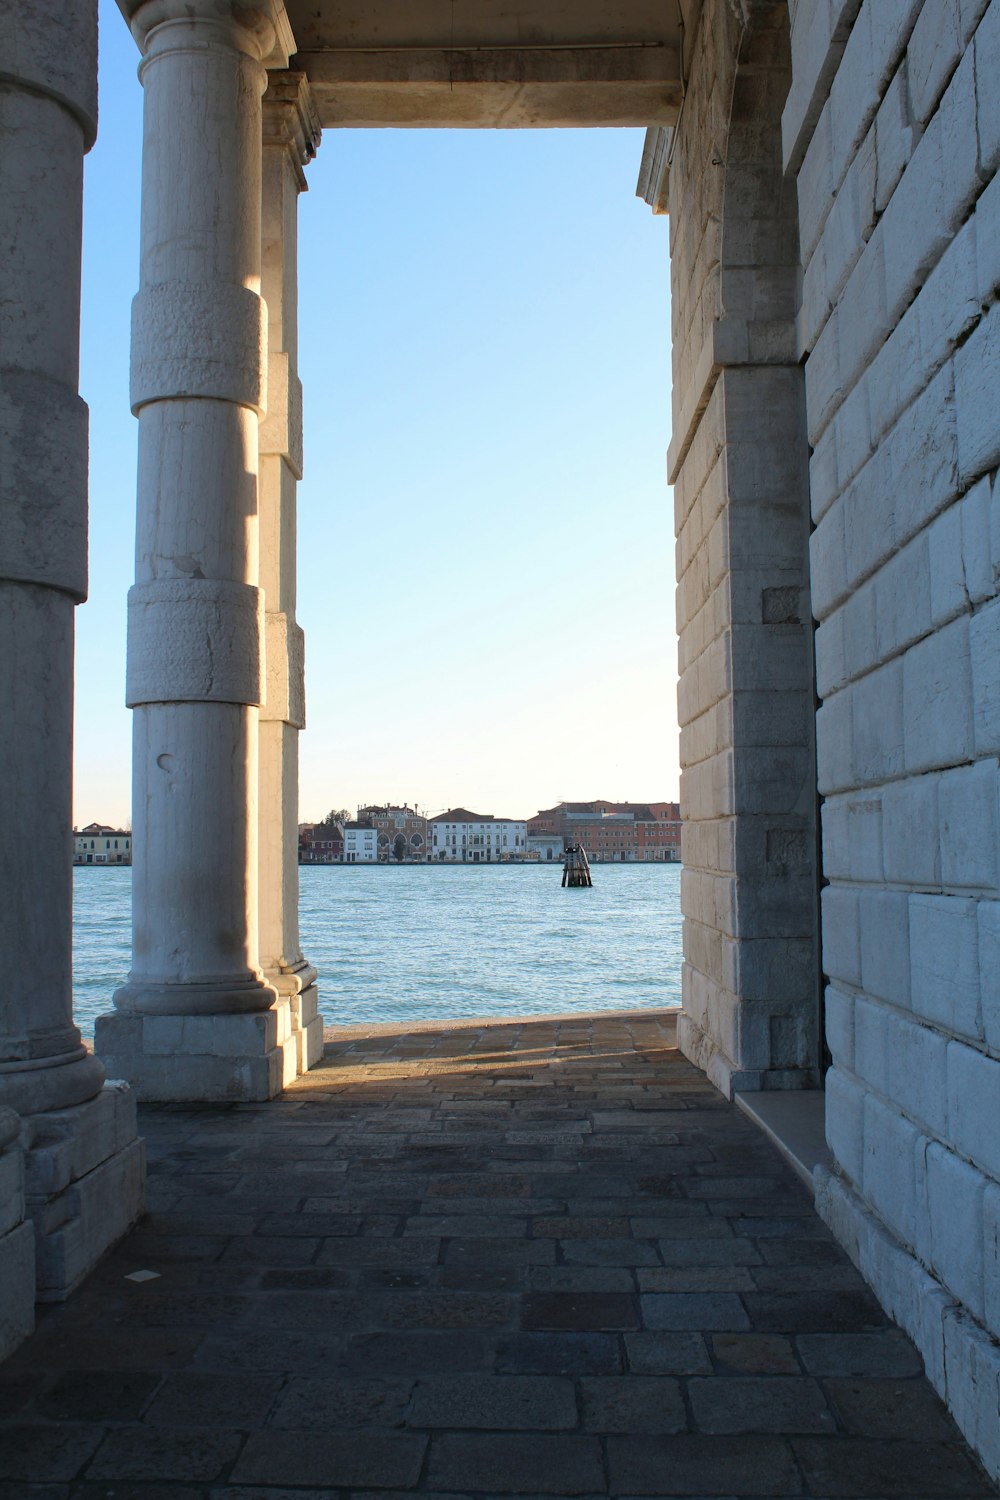 a stone walkway with pillars and a body of water in the background